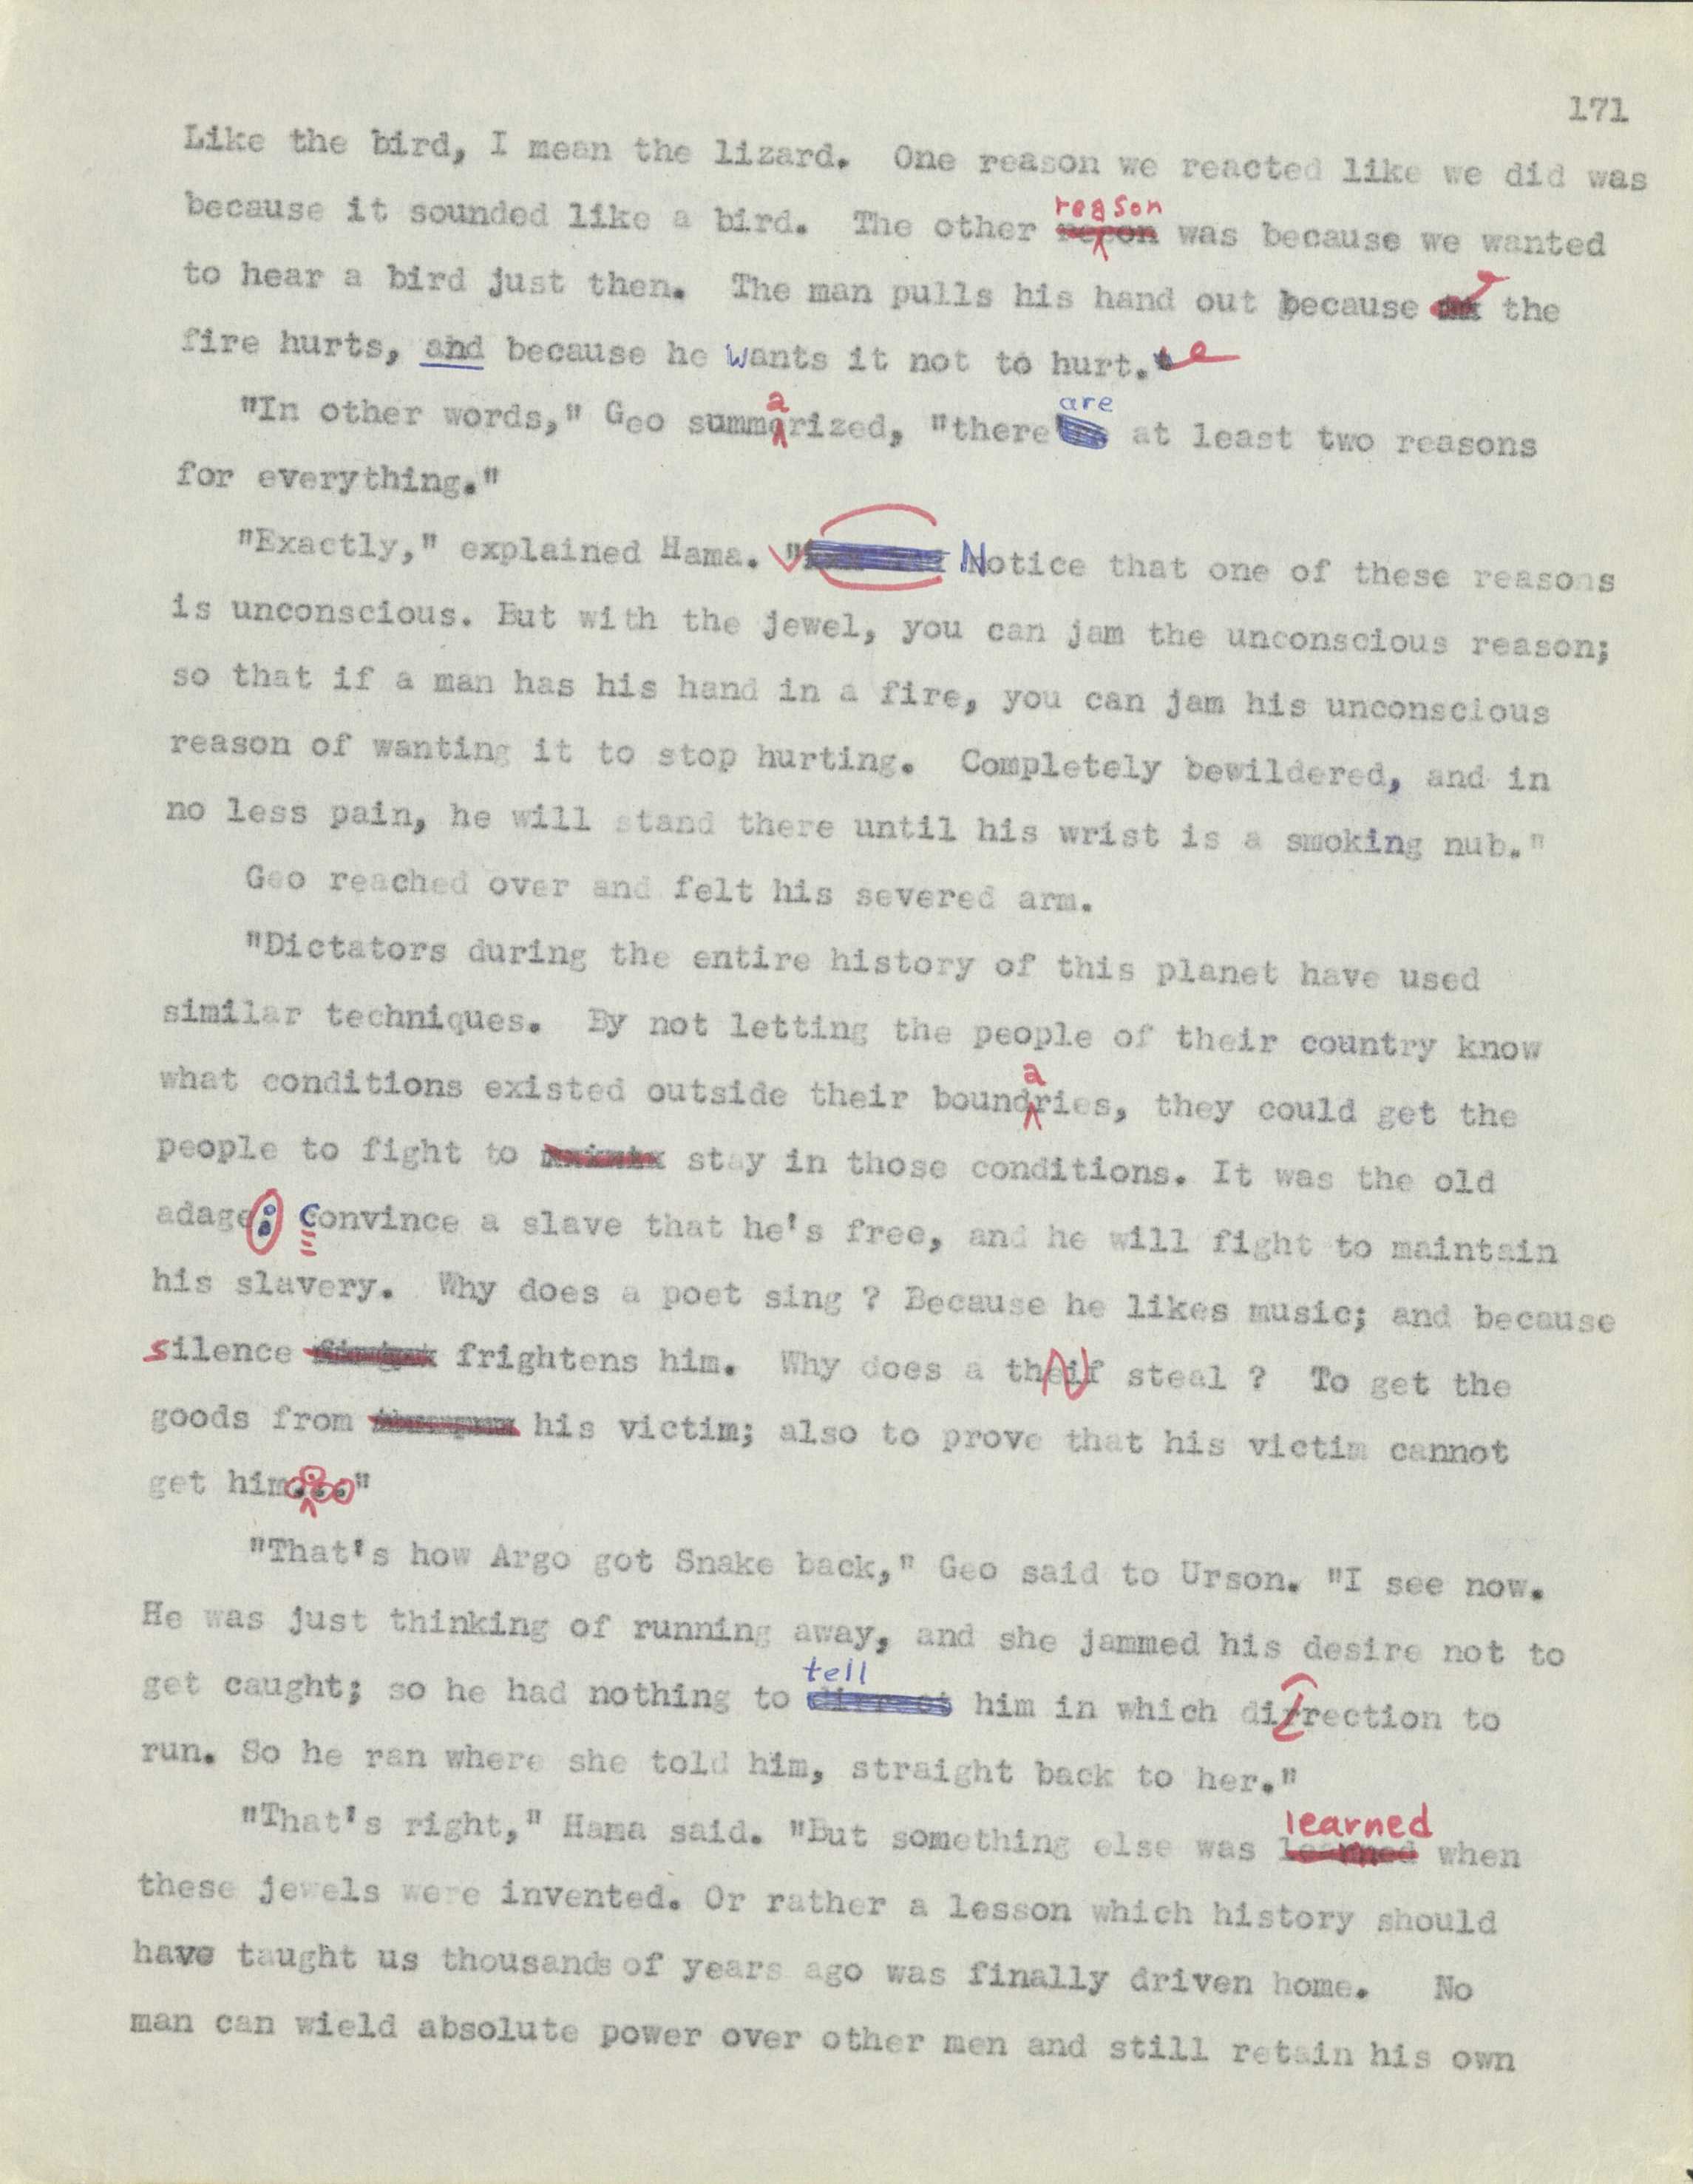 A typed manuscript of Jewel. The manuscript fill the page and has red and white pen edits.